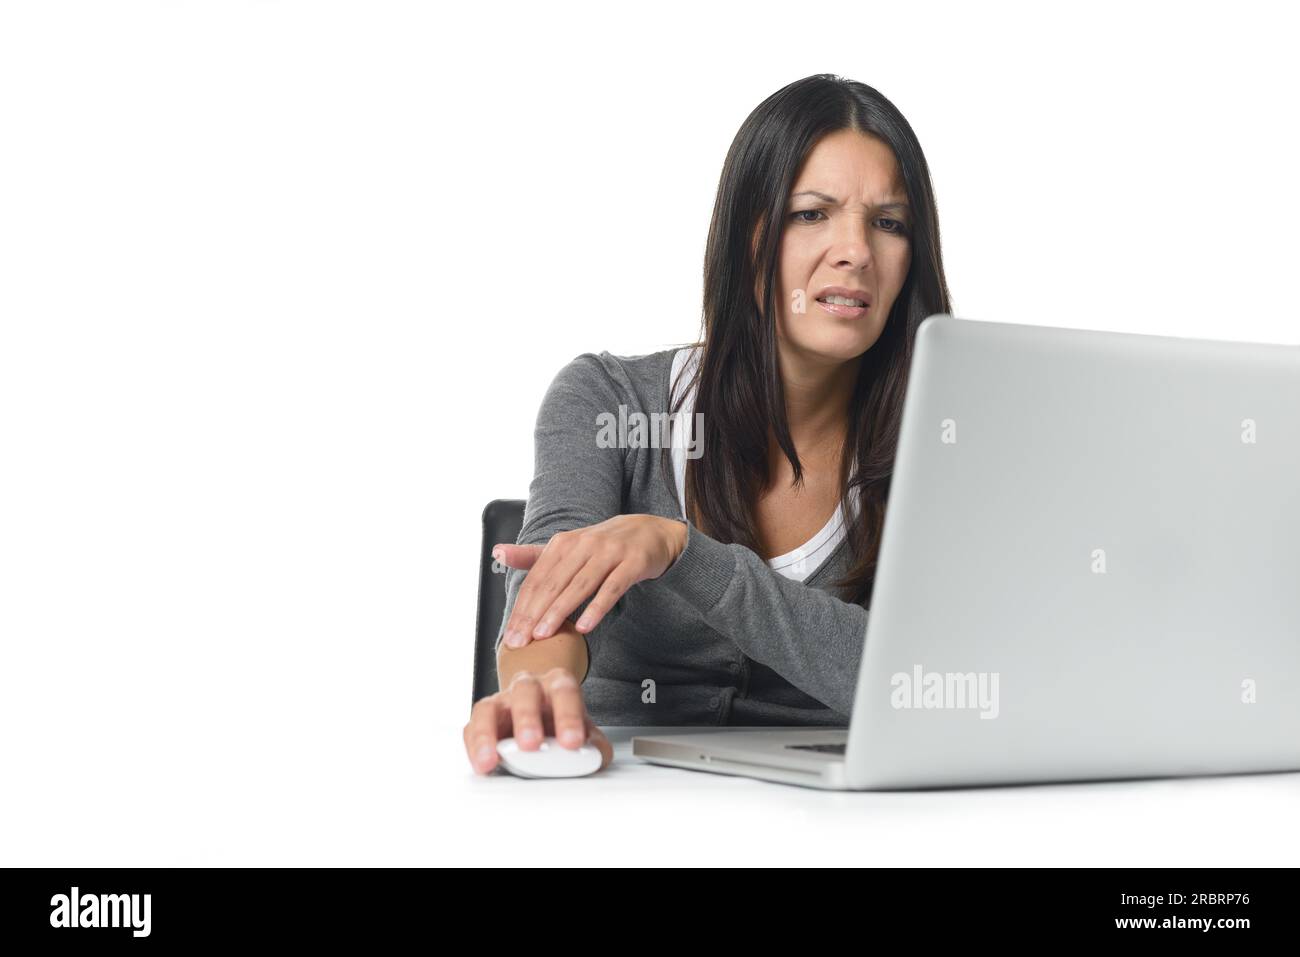 Young businesswoman rubbing and massaging her forearm to relieve cramps after using a computer mouse for too long at a stretch, on white Stock Photo